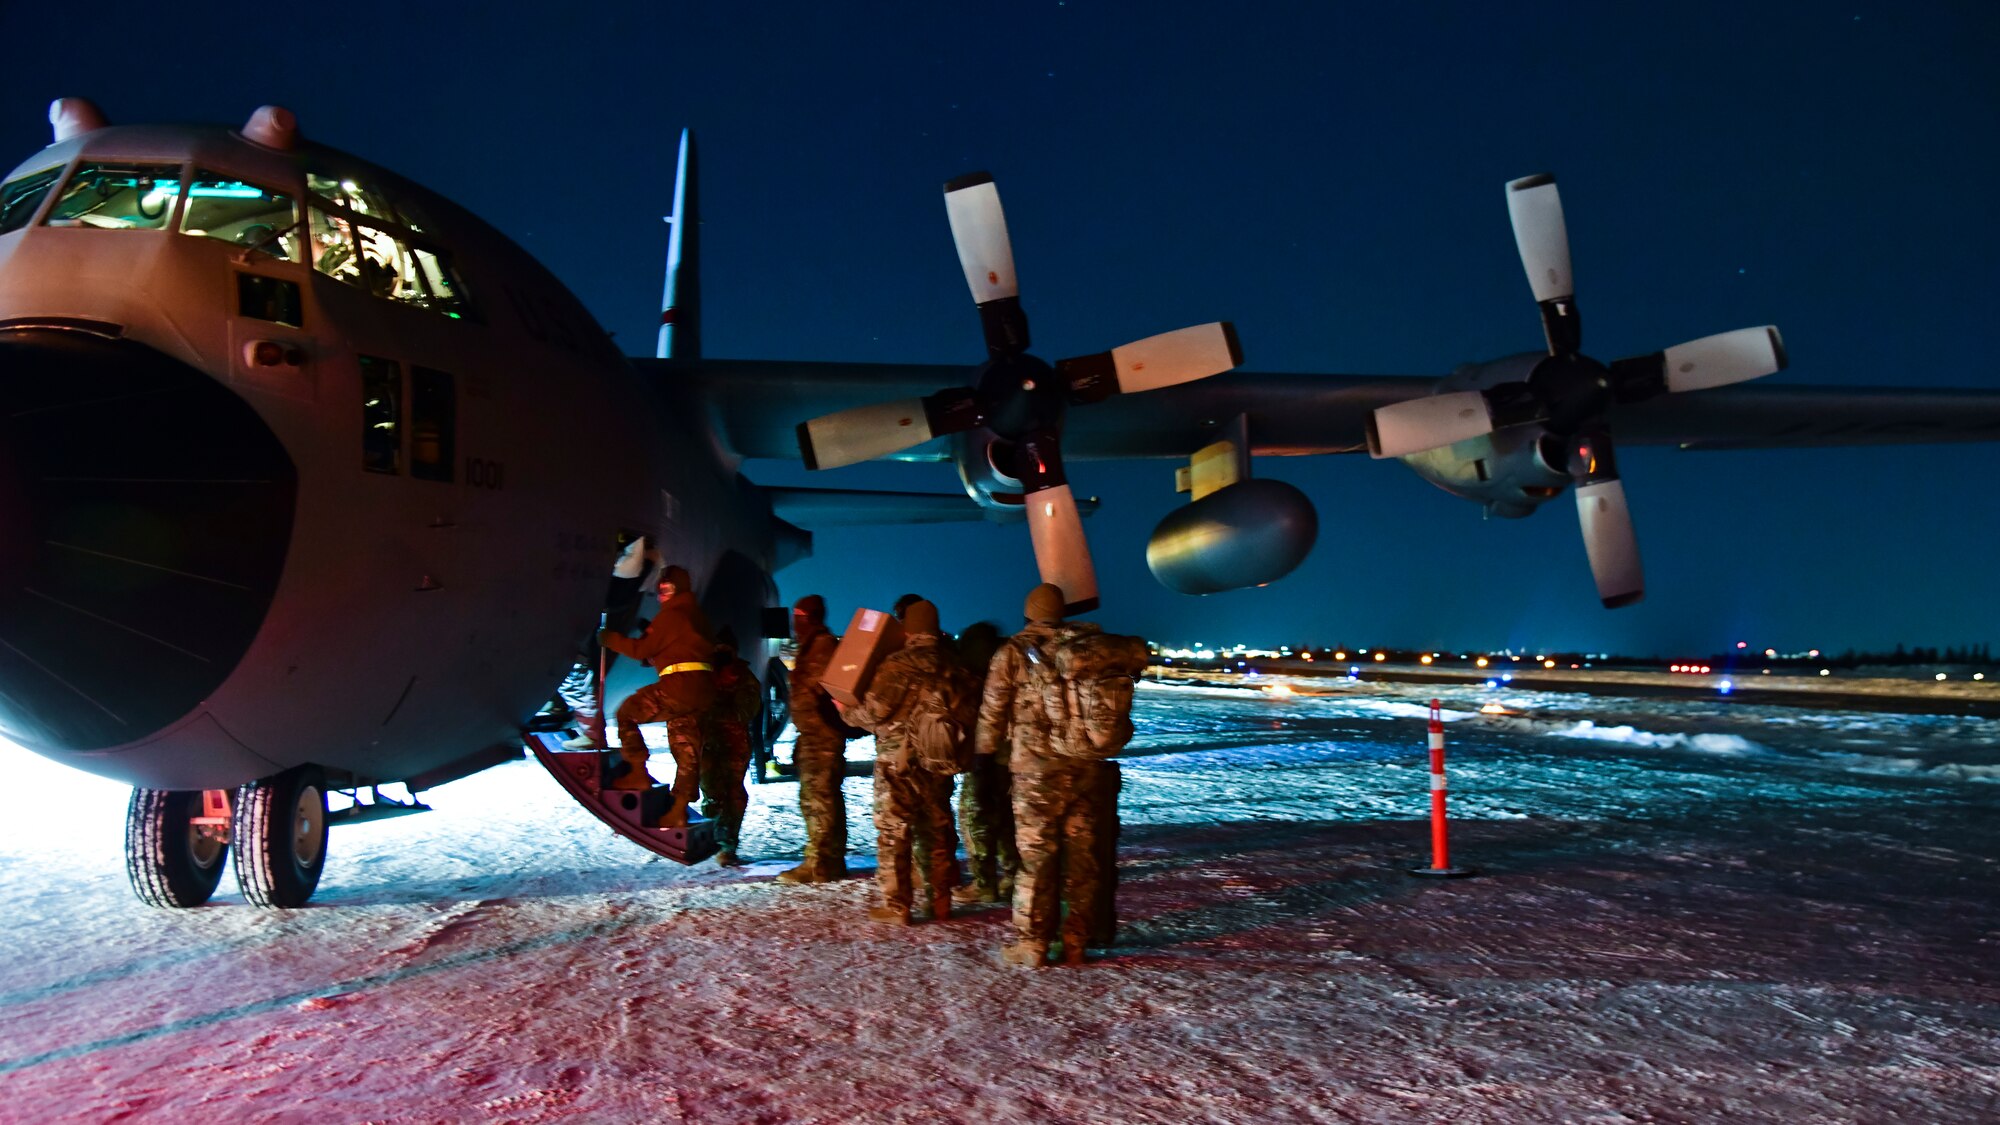 U.S. Air Force Airmen from the 148th Fighter Wing step onto a C-130 in Yellowknife, Canada preparing to forward-deploy in the early morning hours during North American Aerospace Defense Command’s Arctic air defense exercise, Amalgam Dart 21-2, March 22, 2021. The exercise will run from March 20-26 and range from the Beaufort Sea to Thule, Greenland and extend south down the Eastern Atlantic to the U.S. coast of Maine.